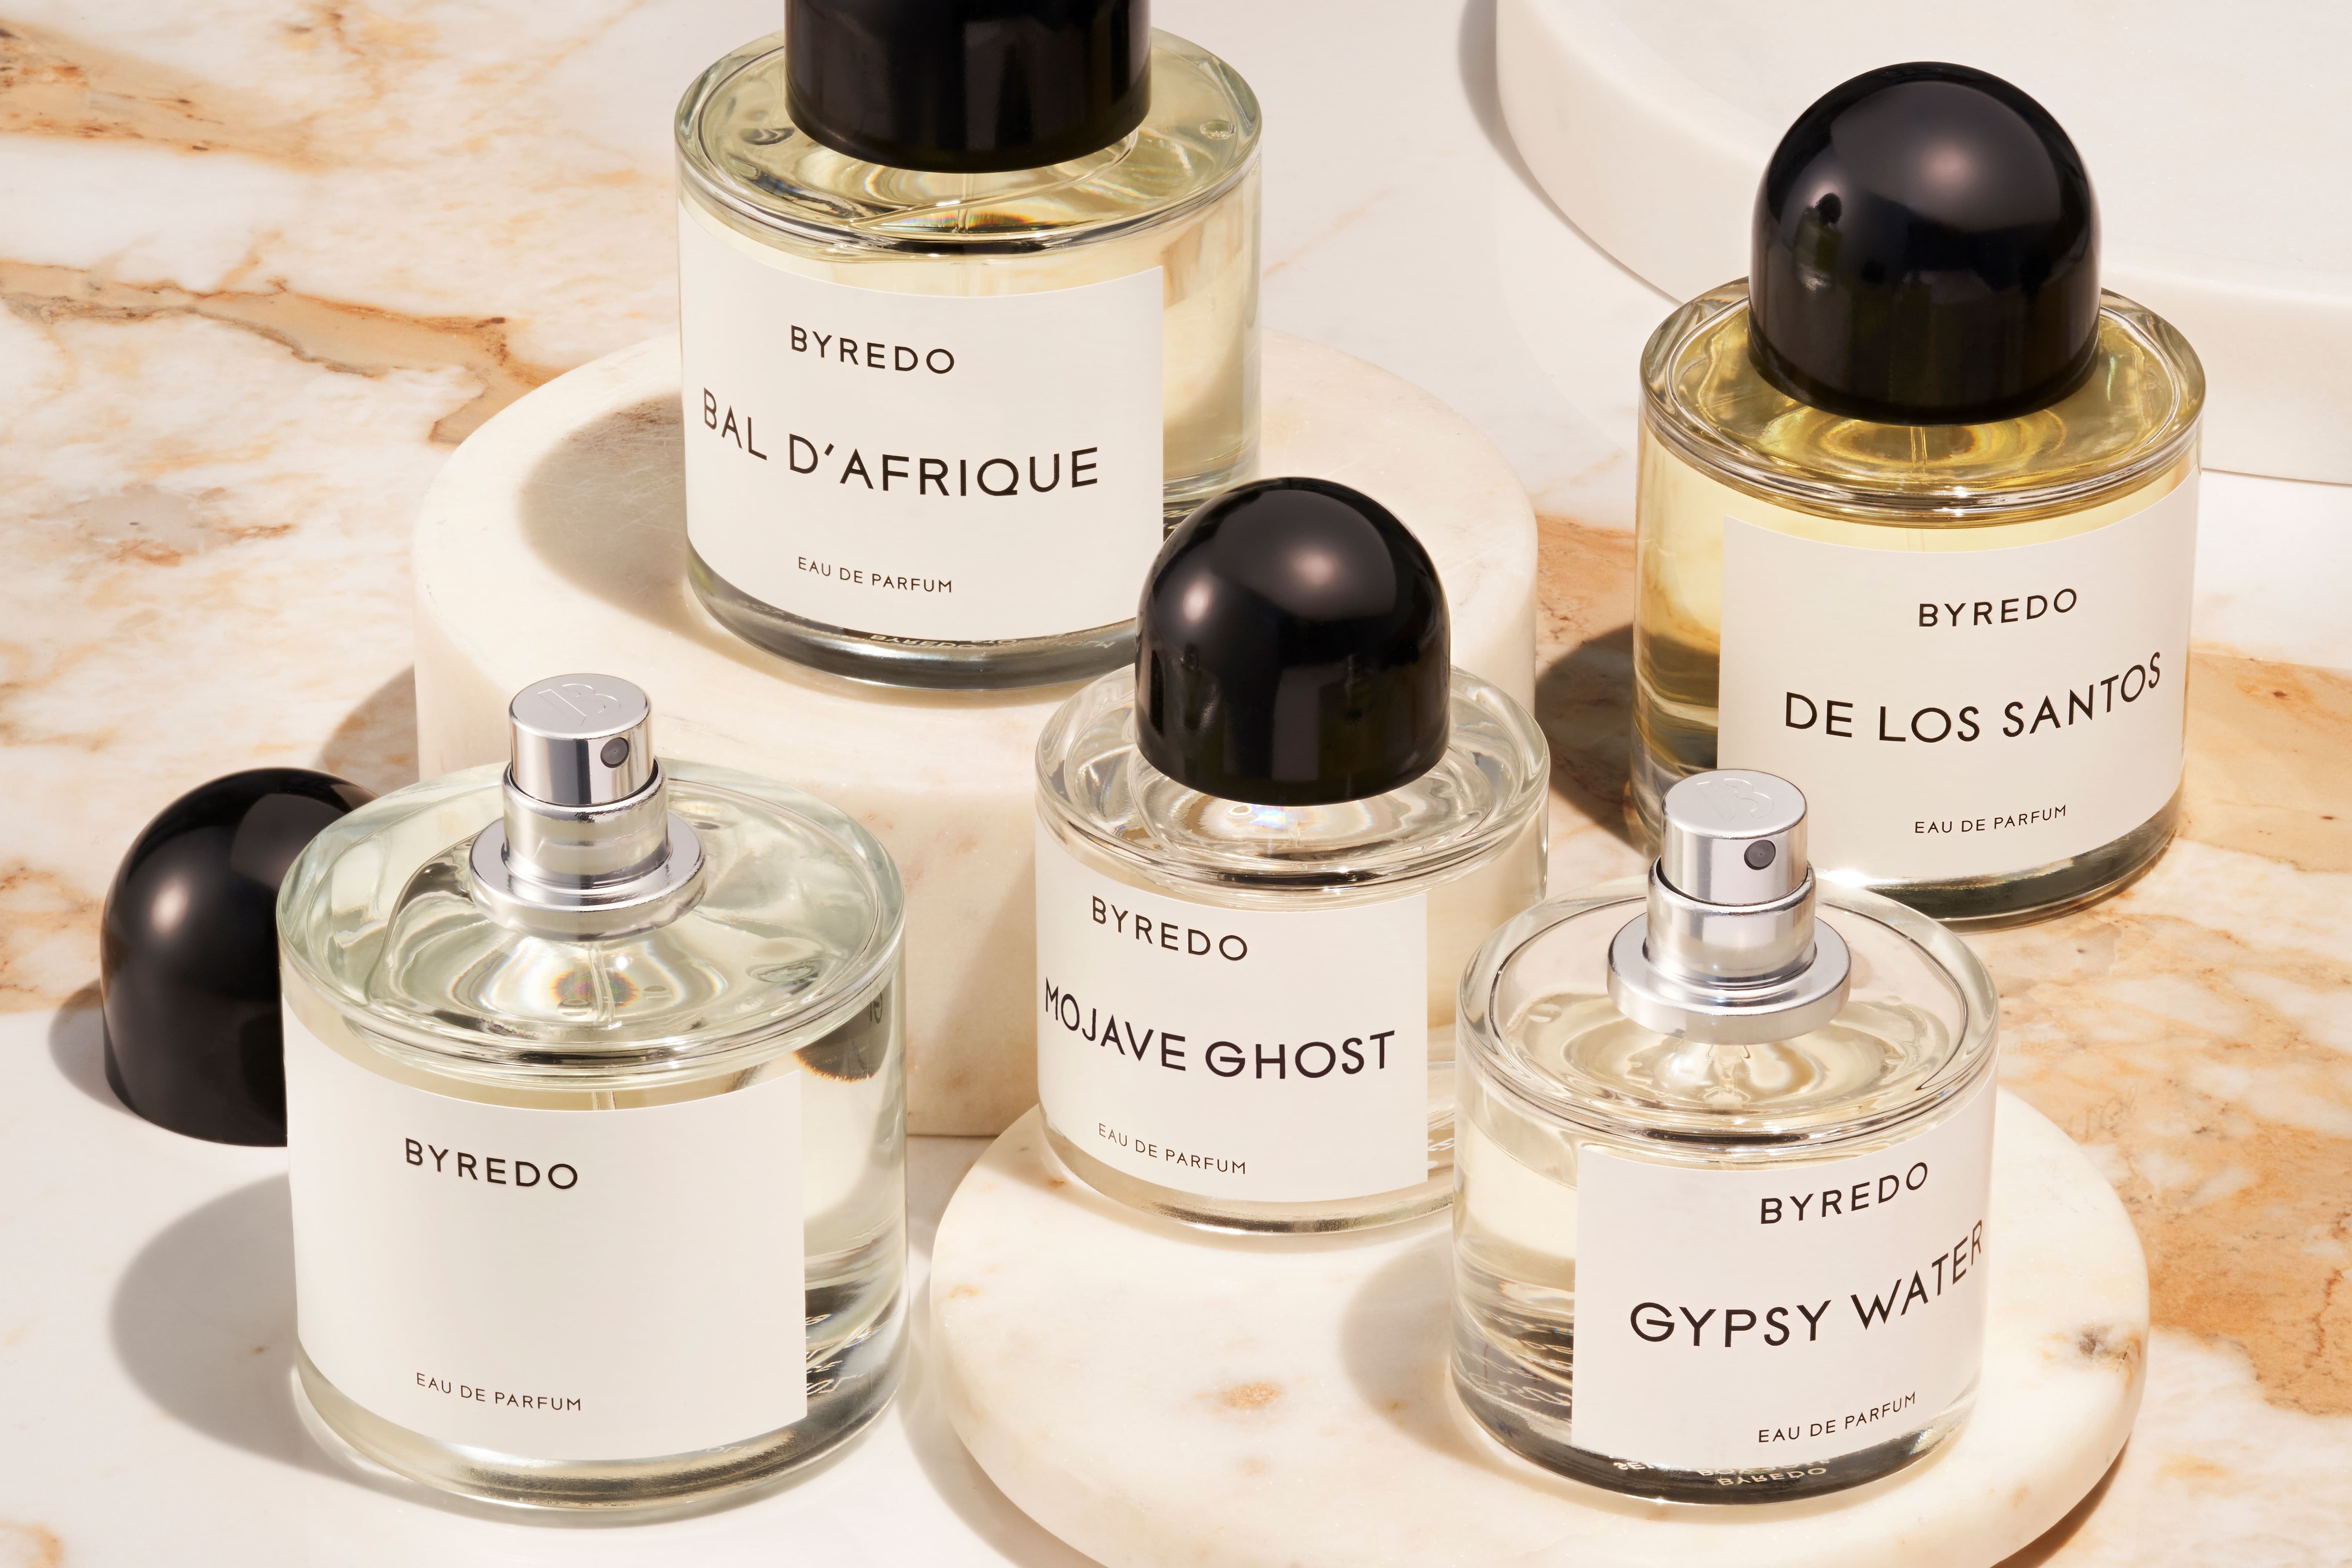 10 Best Byredo Fragrances and What They Smell Like